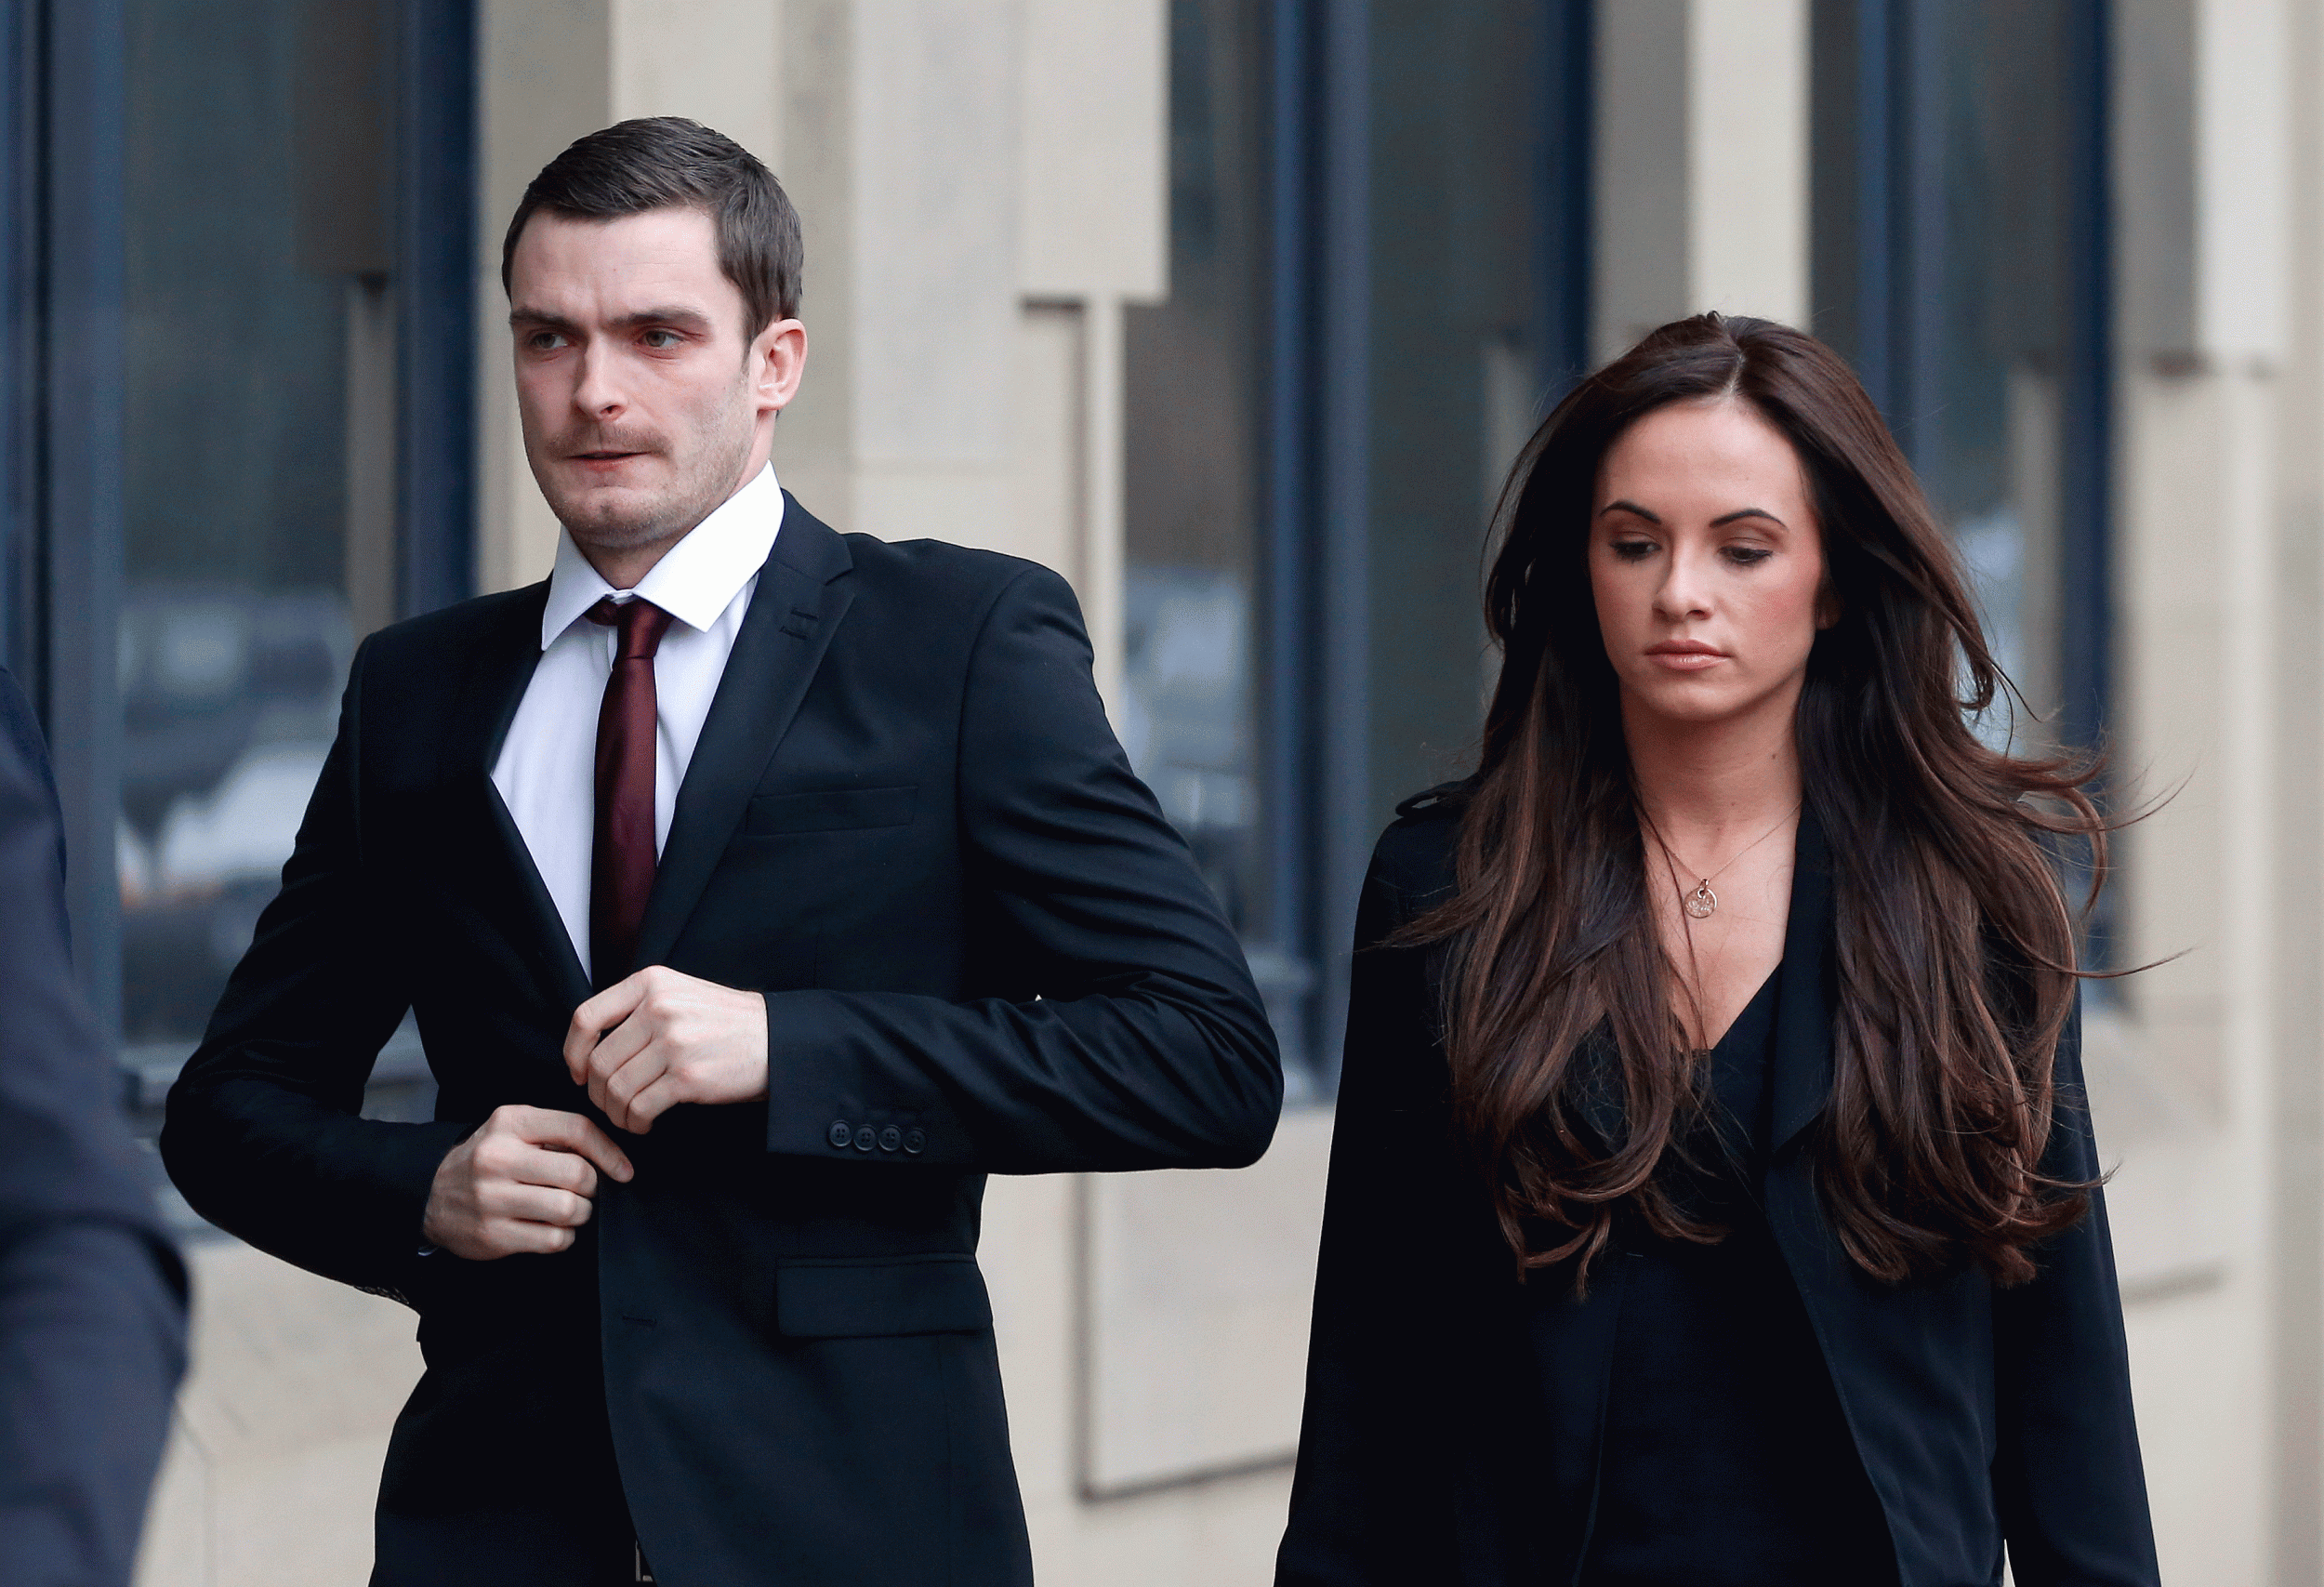 Adam Johnson with his partner, Stacey Flounders